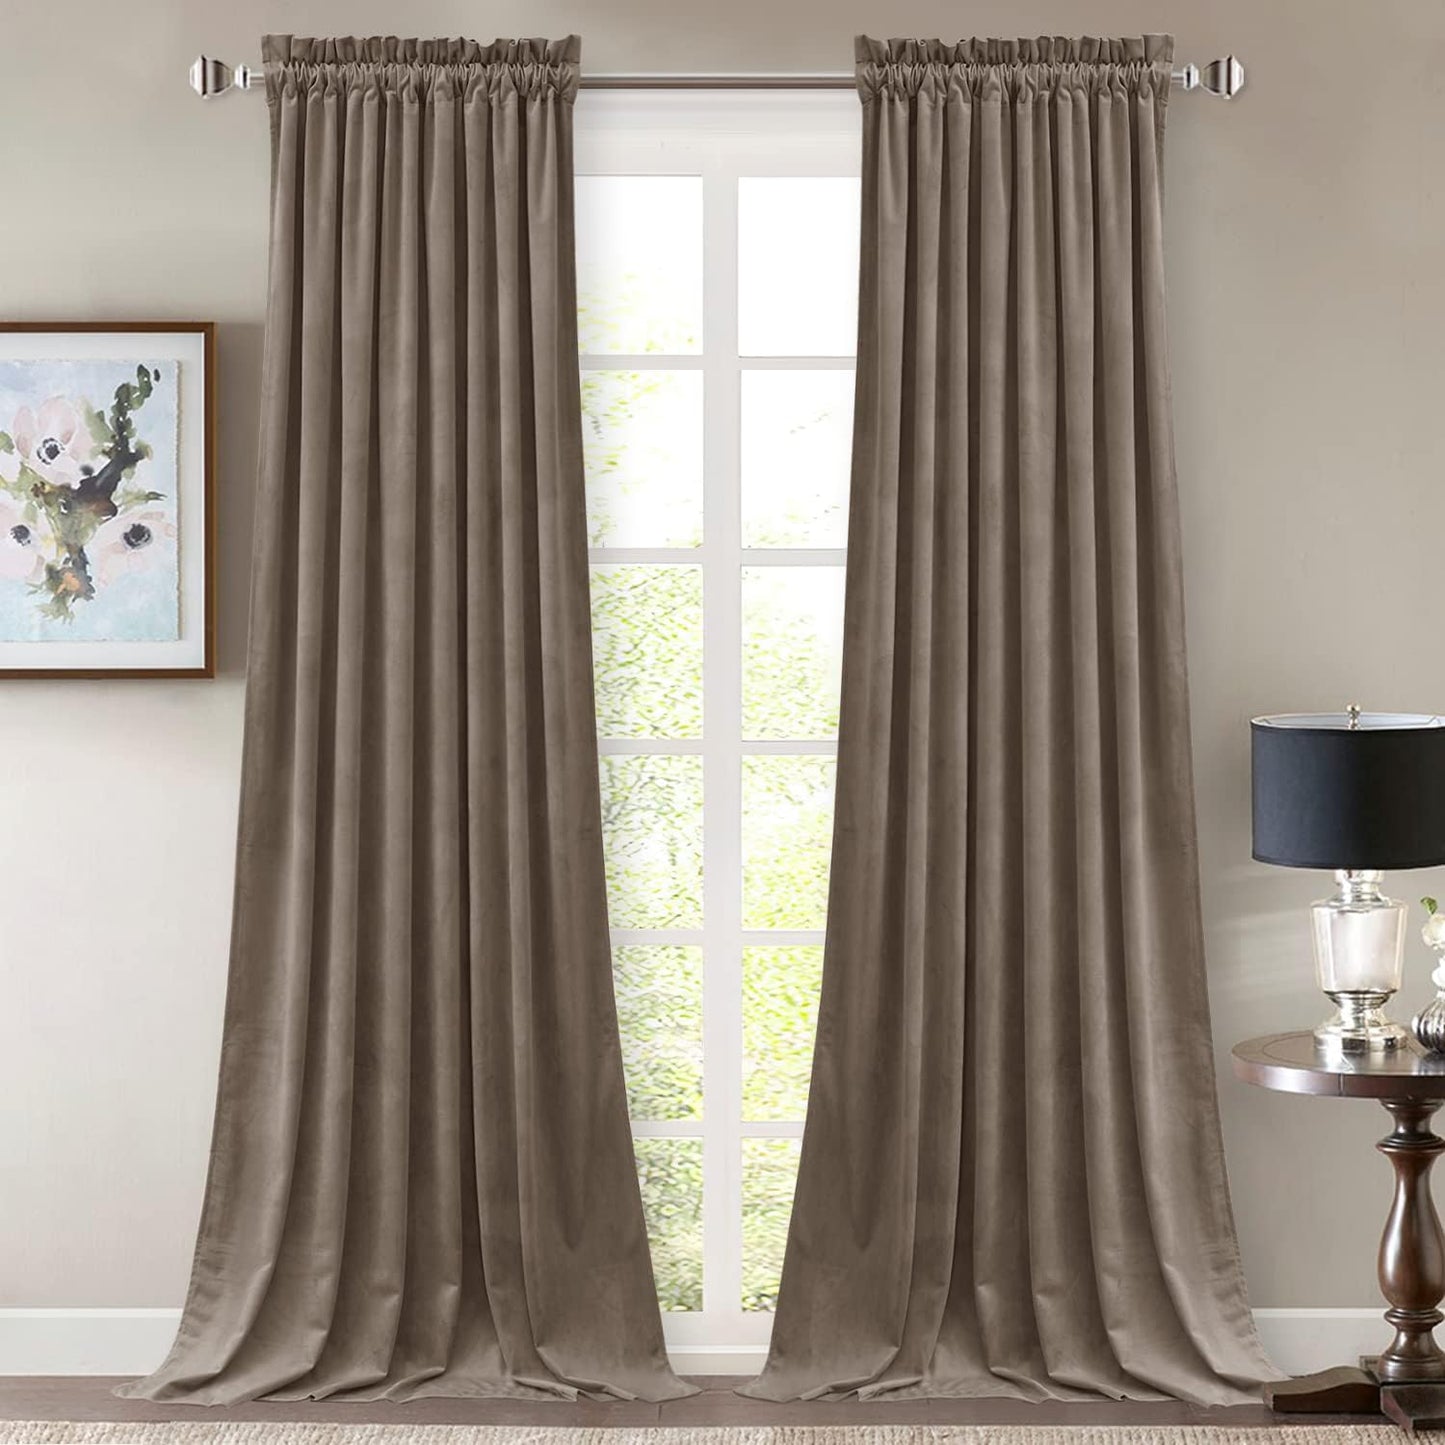 Stangh Theater Red Velvet Curtains - Super Soft Velvet Blackout Insulated Curtain Panels 84 Inches Length for Living Room Holiday Decorative Drapes for Master Bedroom, W52 X L84, 2 Panels  StangH Taupe W52" X L96" 